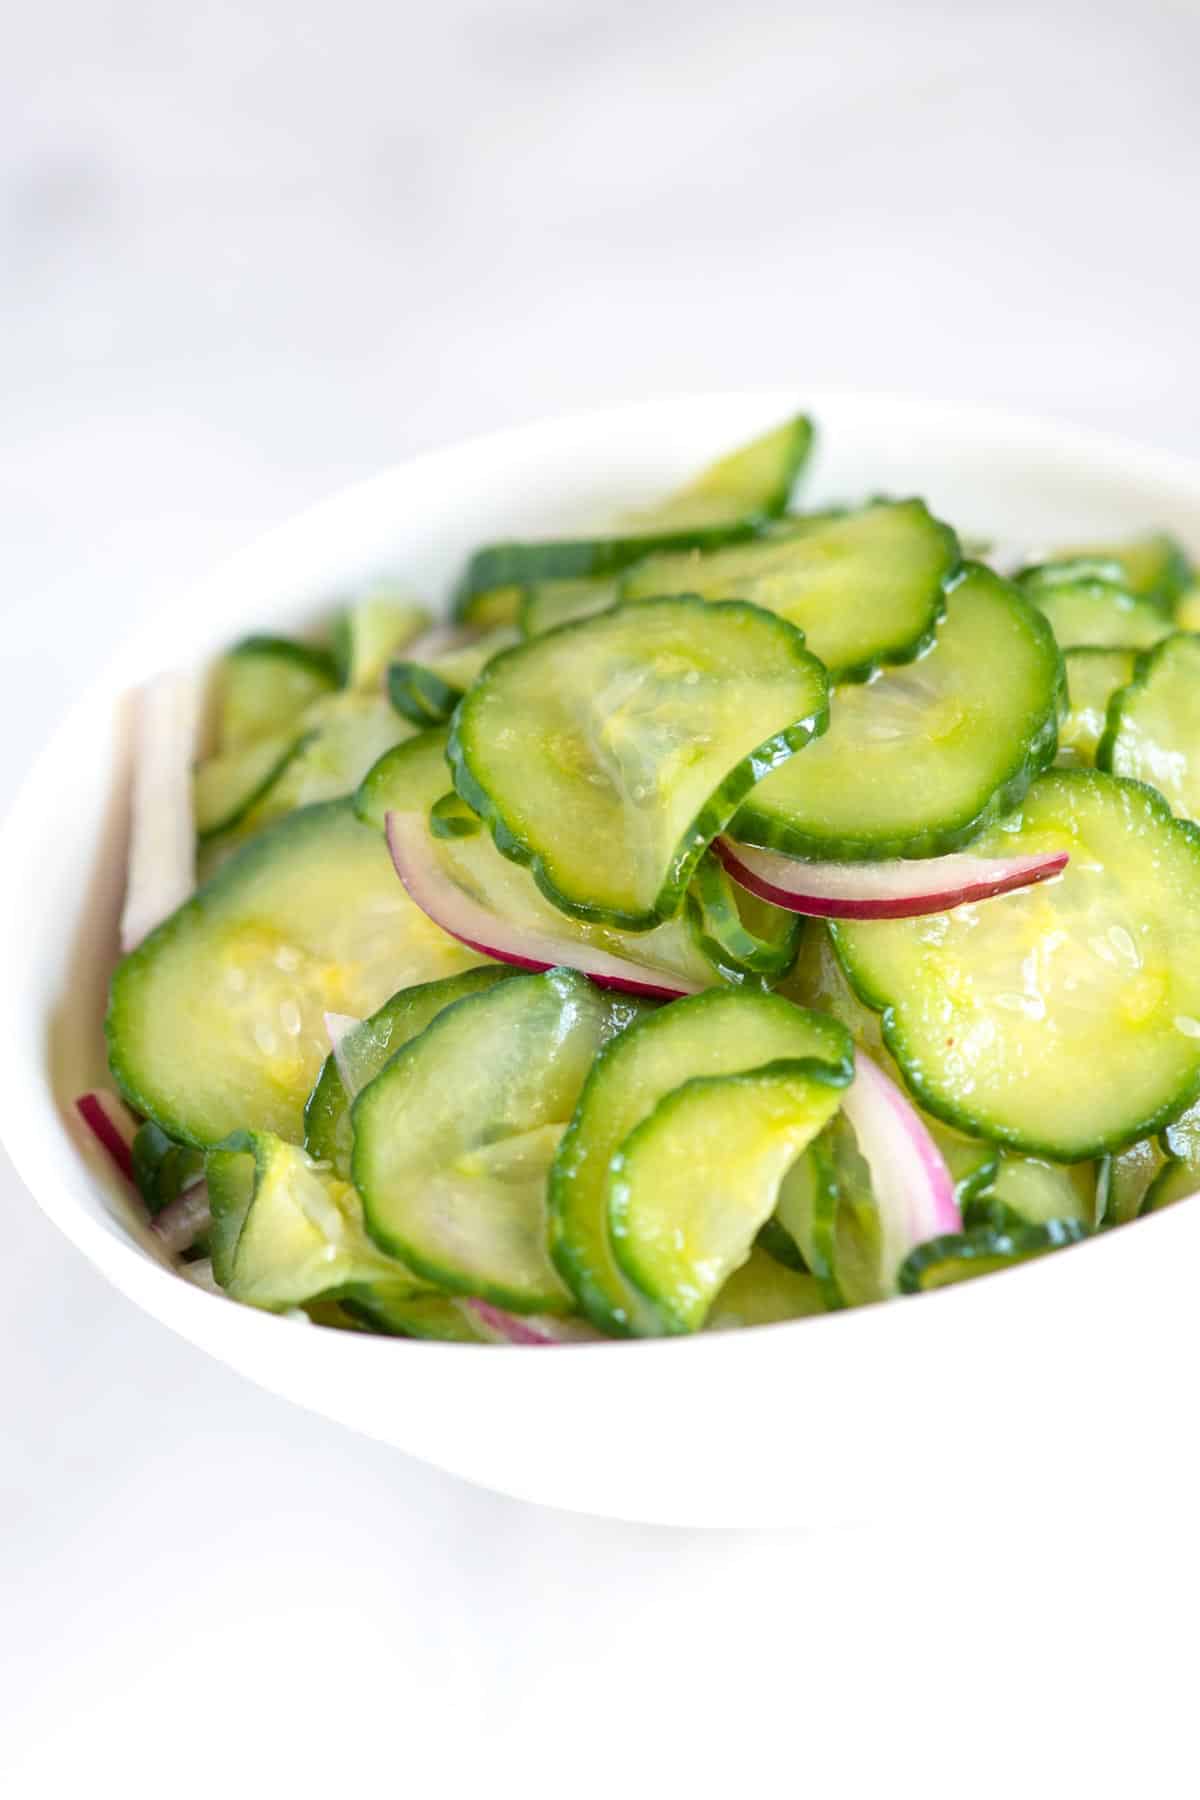 Difference Between Slicing and English Cucumbers.